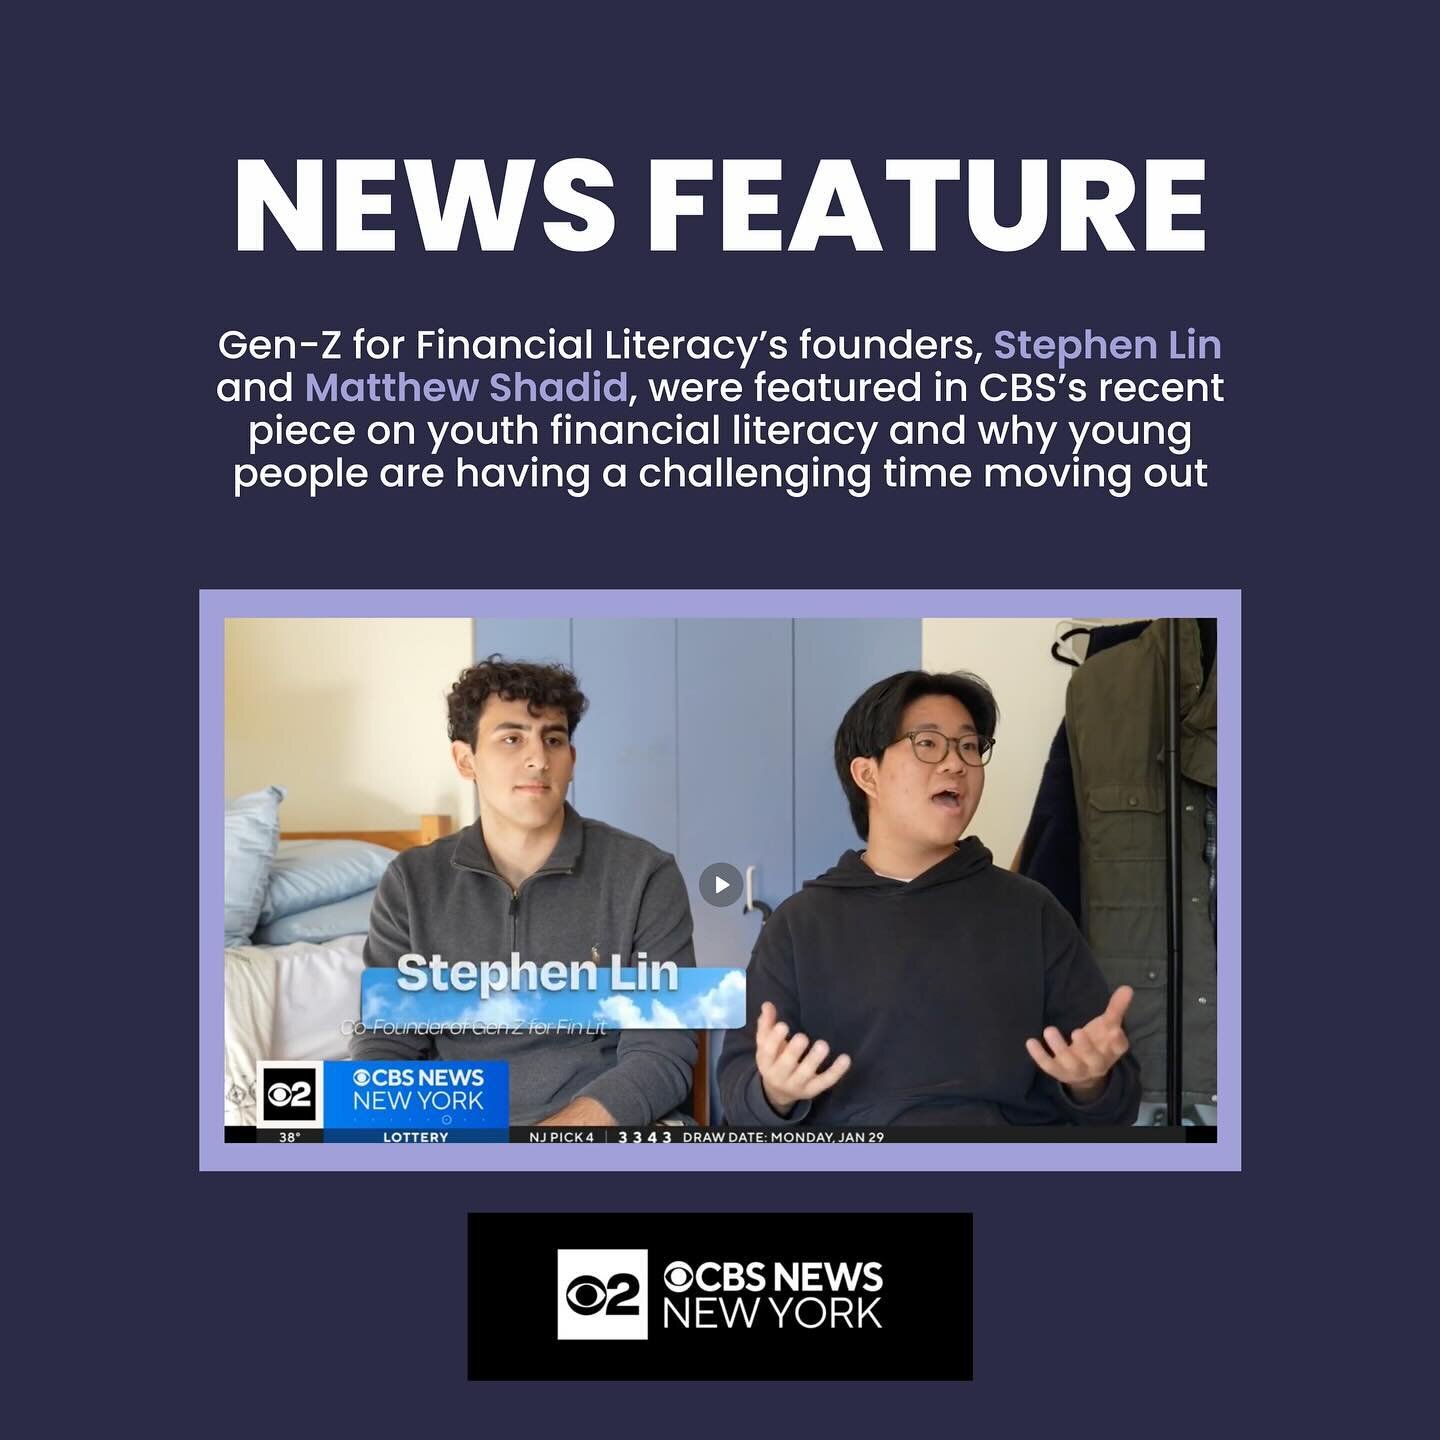 Our founders, Matthew Shadid and Stephen Lin, have been featured in a recent piece from @cbsnewyork. Last month, Matthew and Stephen had the opportunity to discuss their work at Gen-Z for Financial Literacy and why many young people were having a har